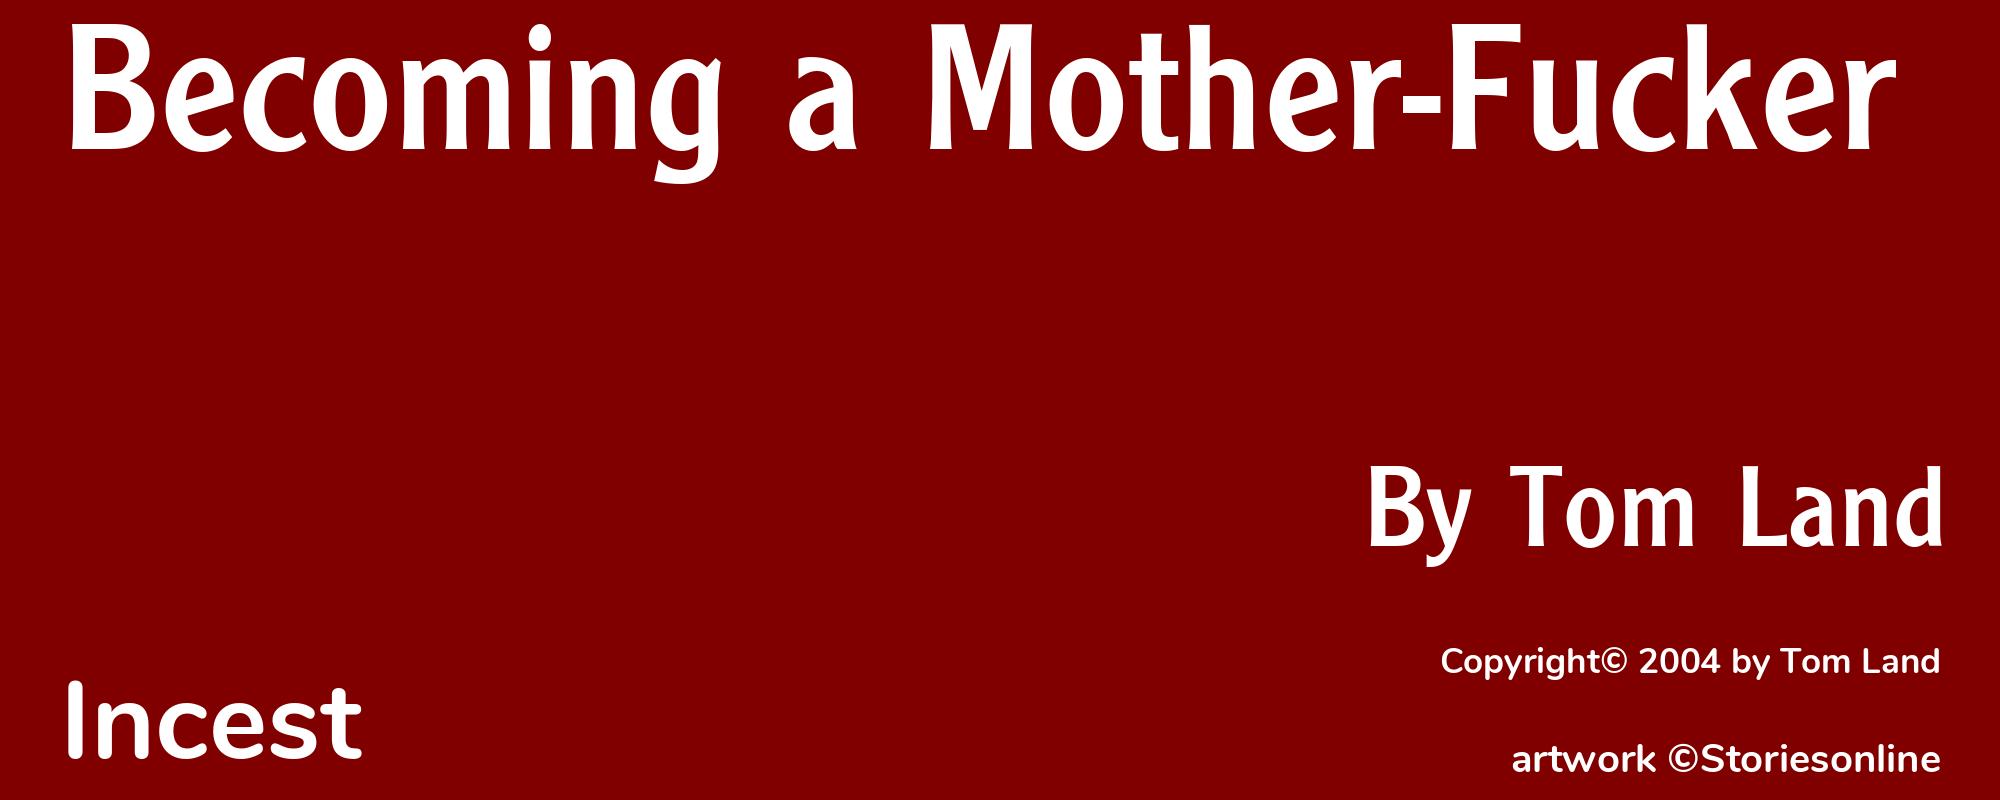 Becoming a Mother-Fucker - Cover